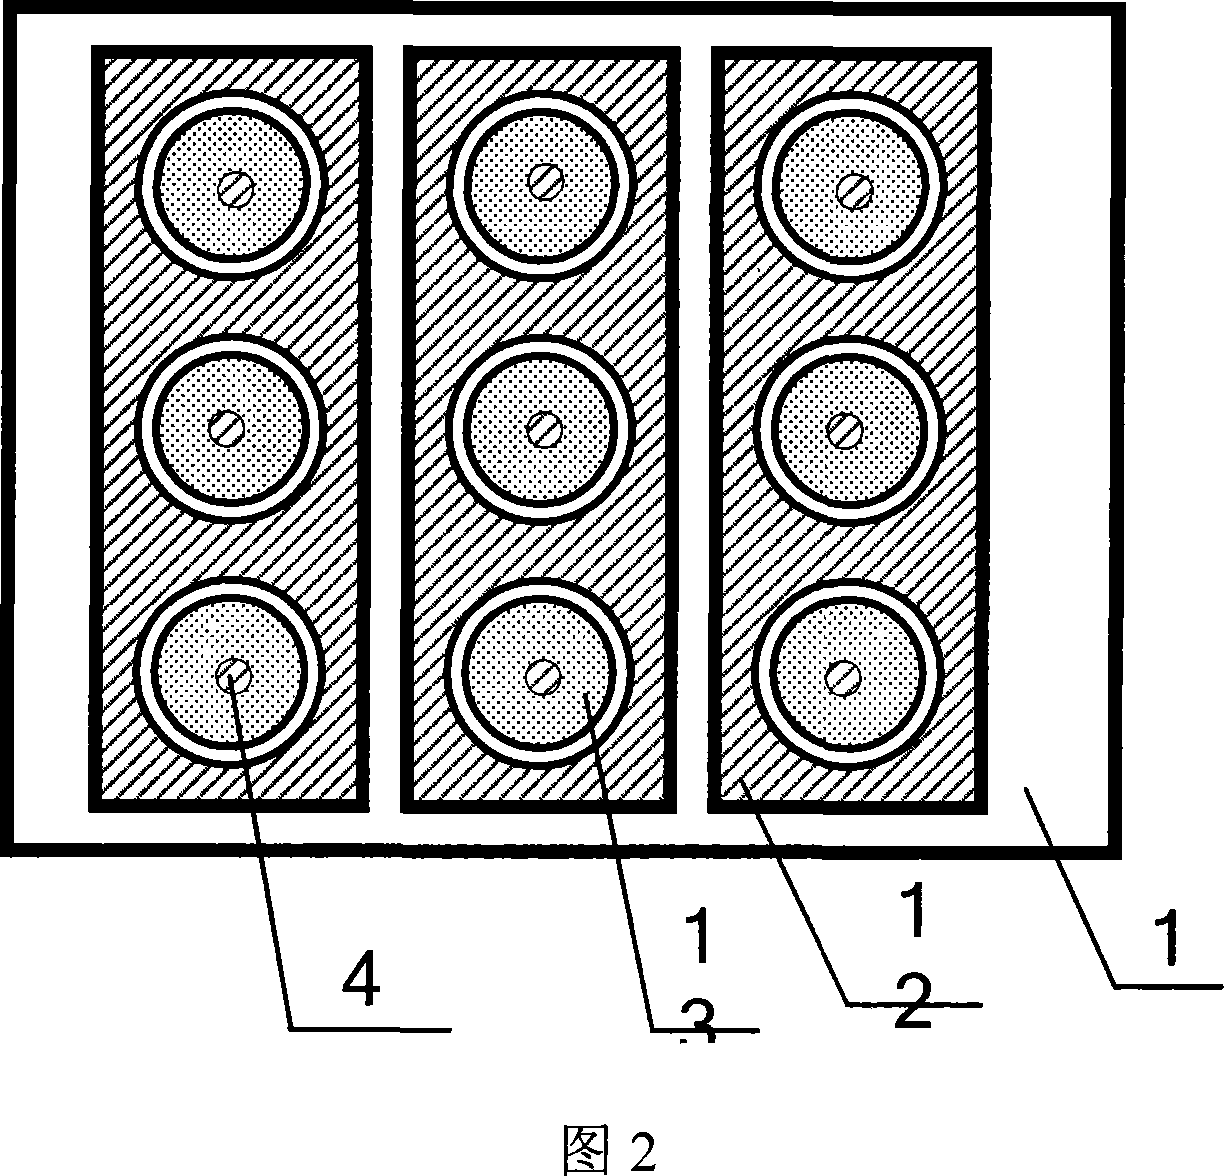 Planar display device with circular internal-grid controlled cathode structure and its production